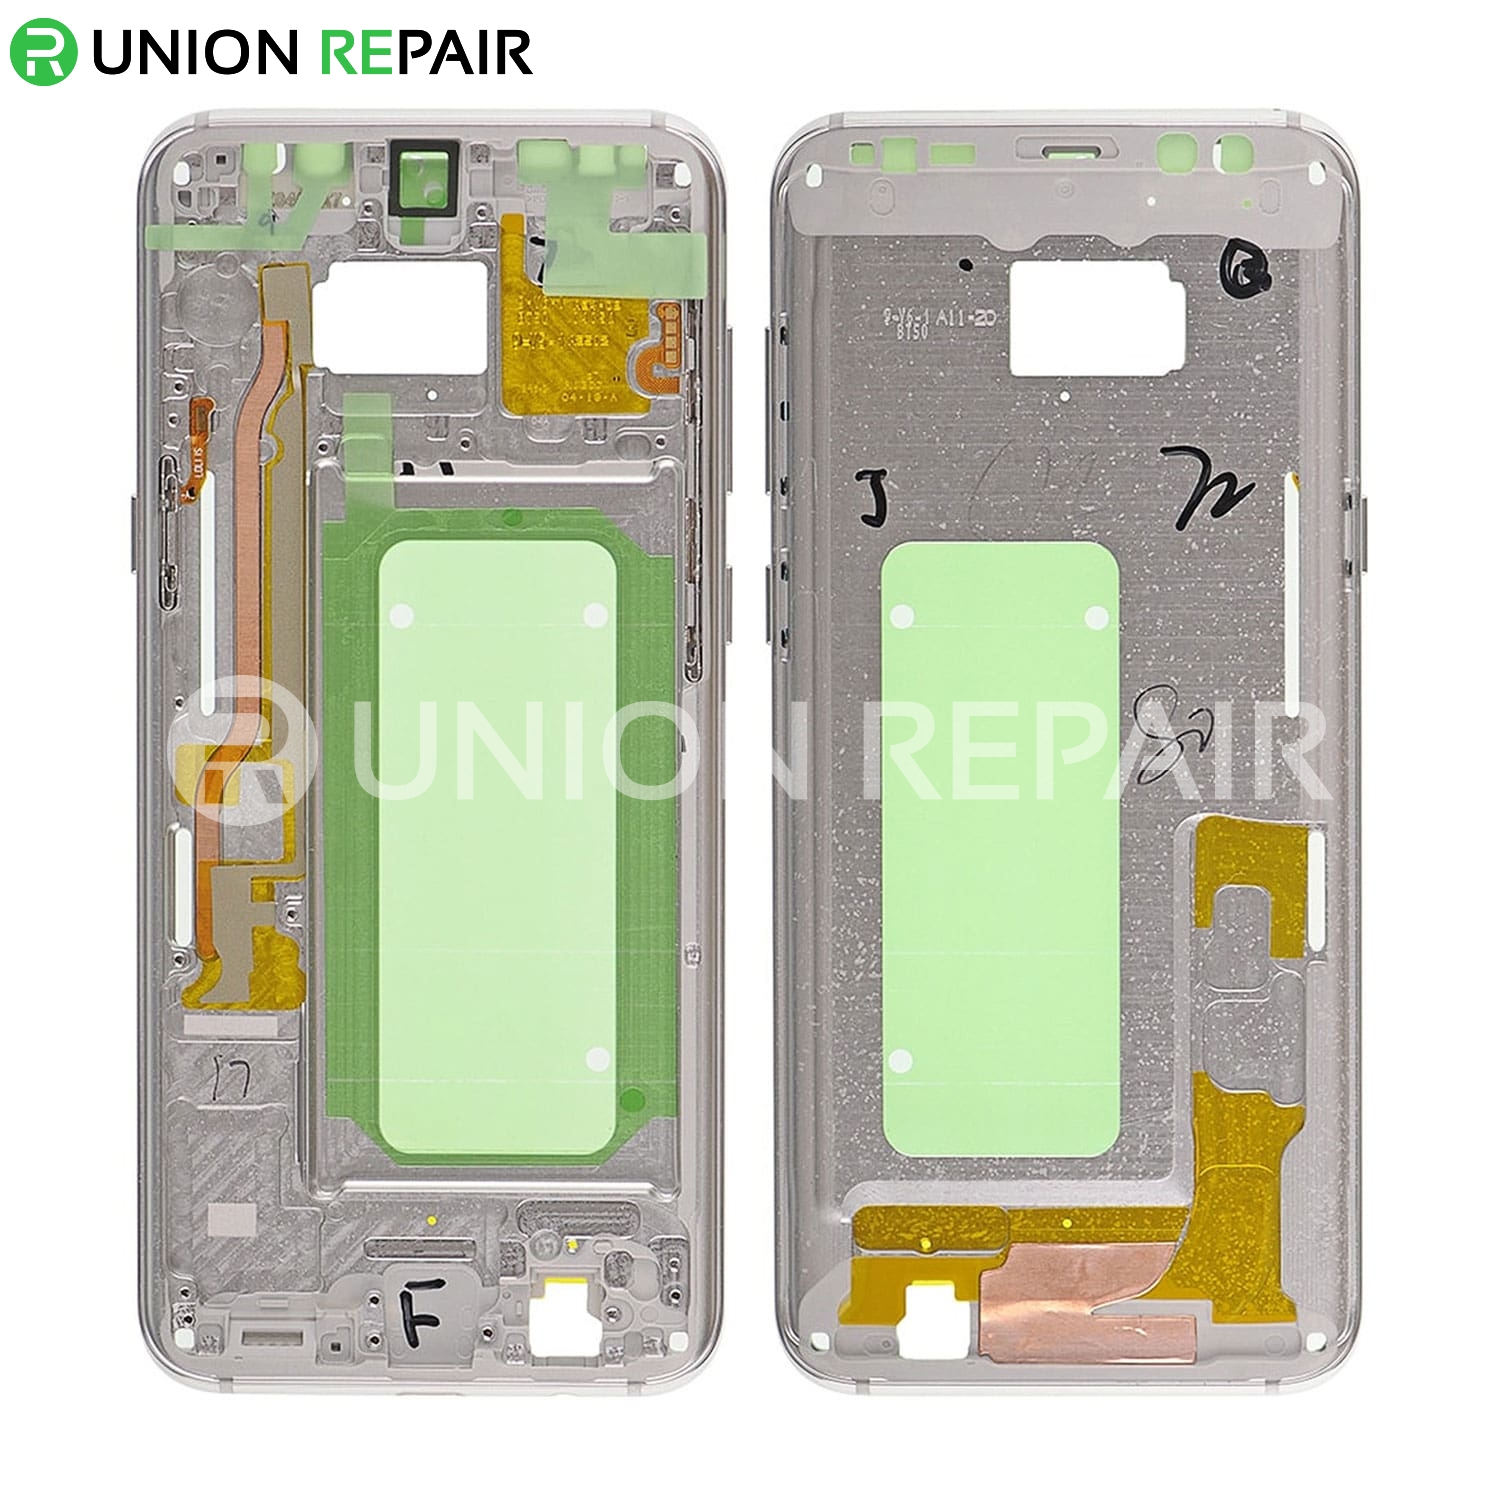 Replacement for Samsung Galaxy S8 Plus SM-G955 Rear Housing Partition - Silver